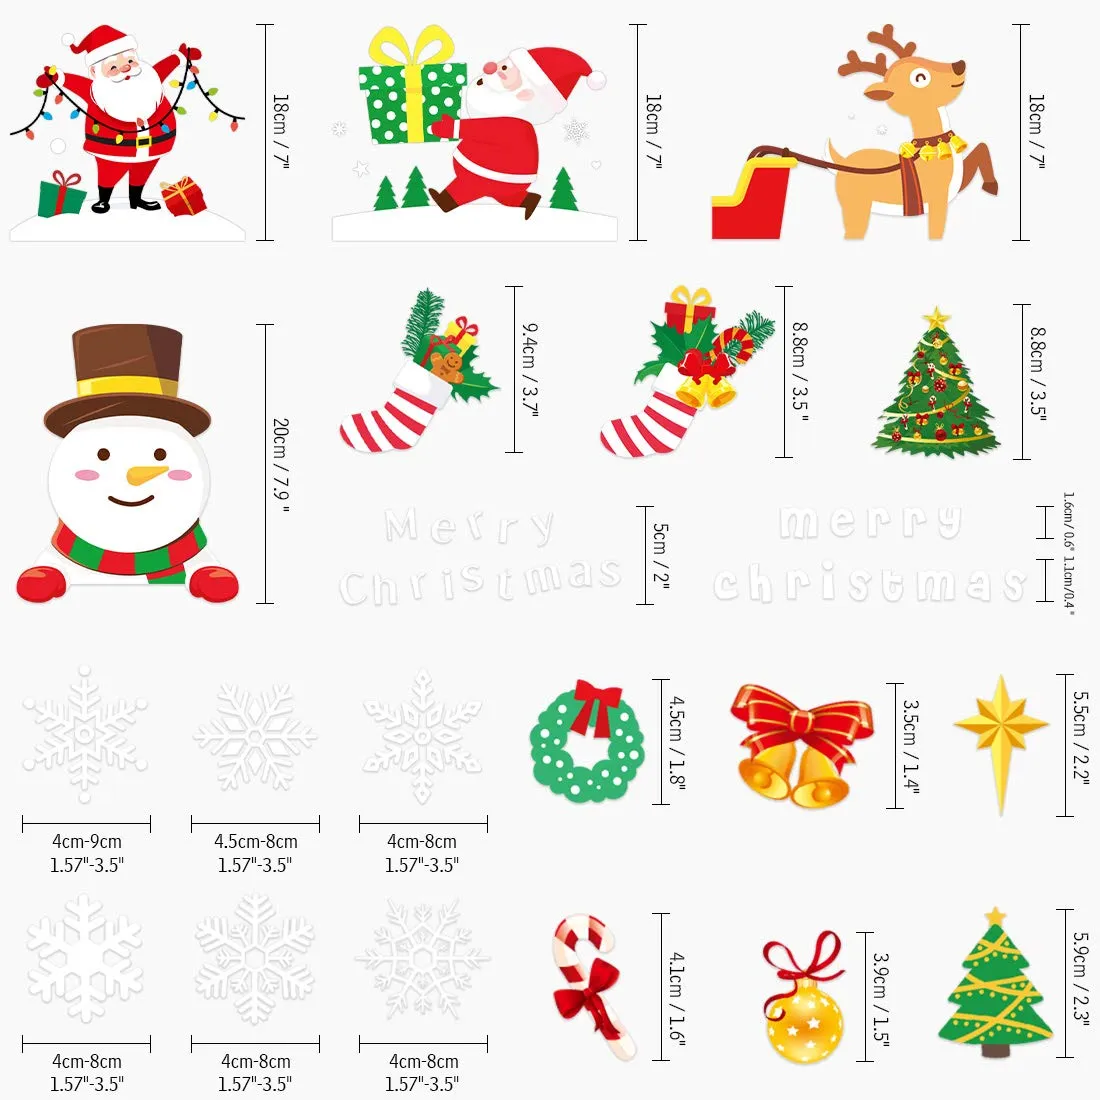 christmas window clings decal stickers xmas snowflake window sticker winter wonderland decorations ornaments party supplies 10 sheets